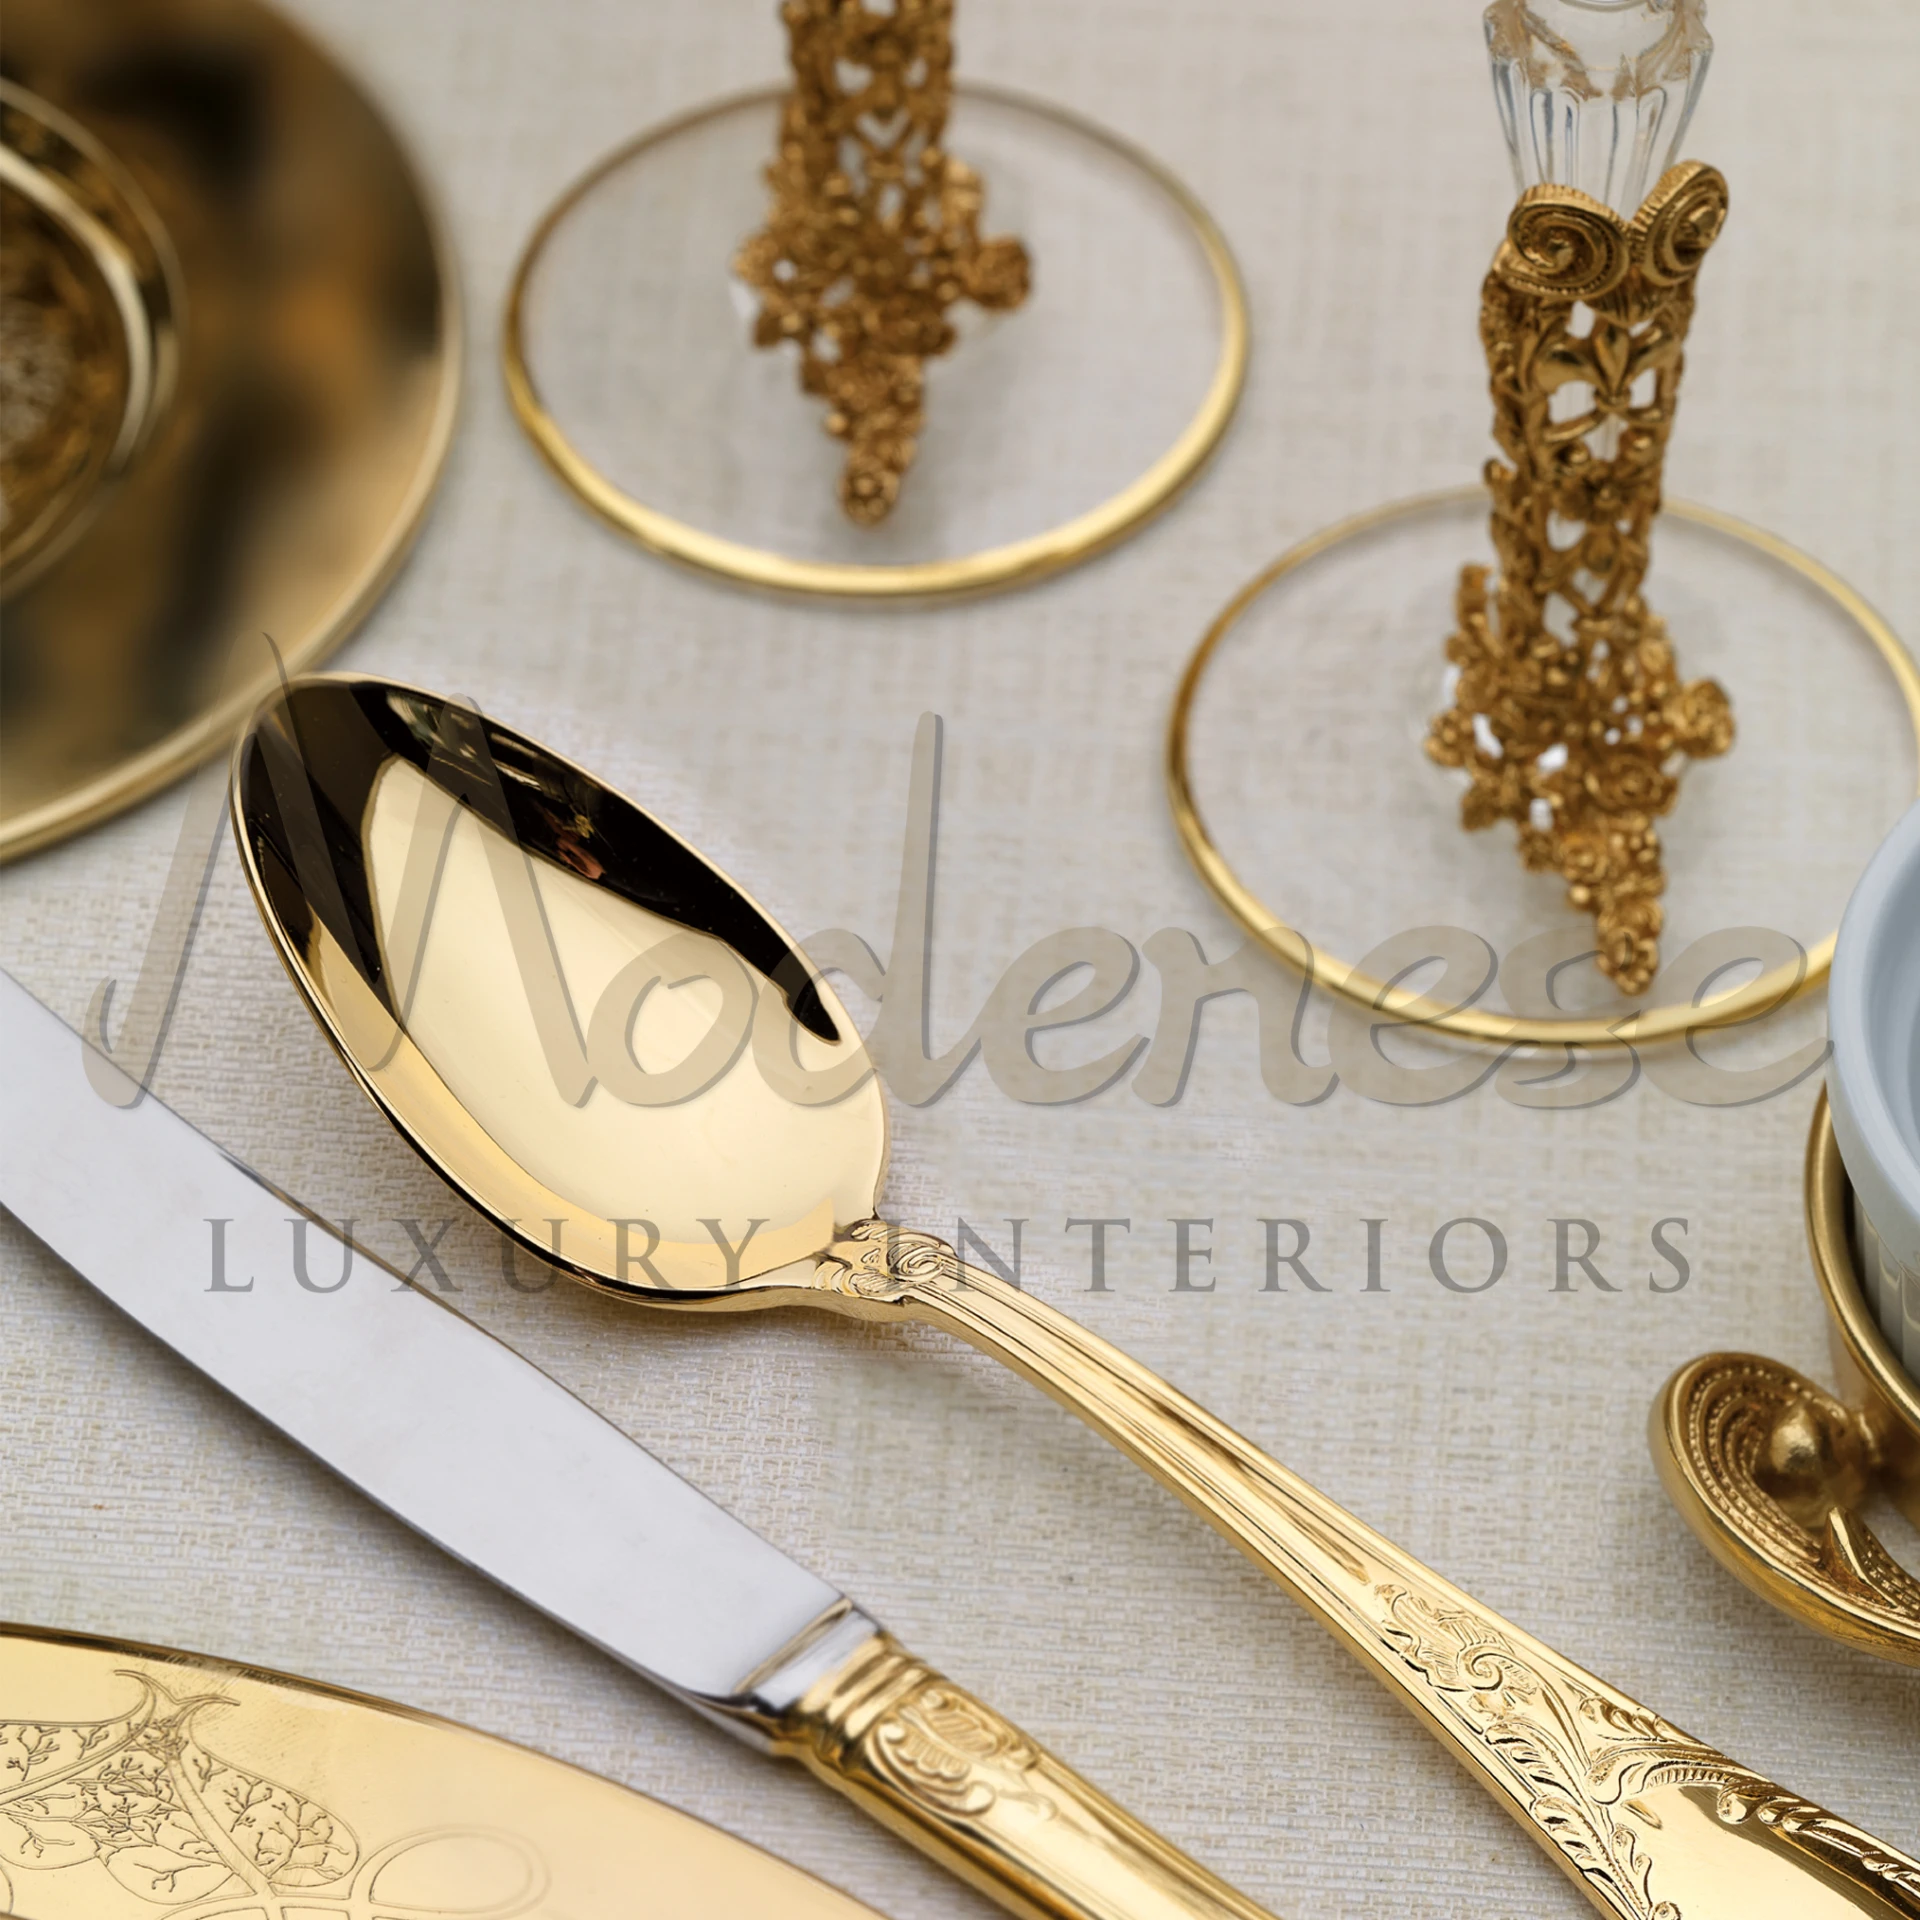 Golden spoon and knife with detailed engraving, part of a luxury dining set